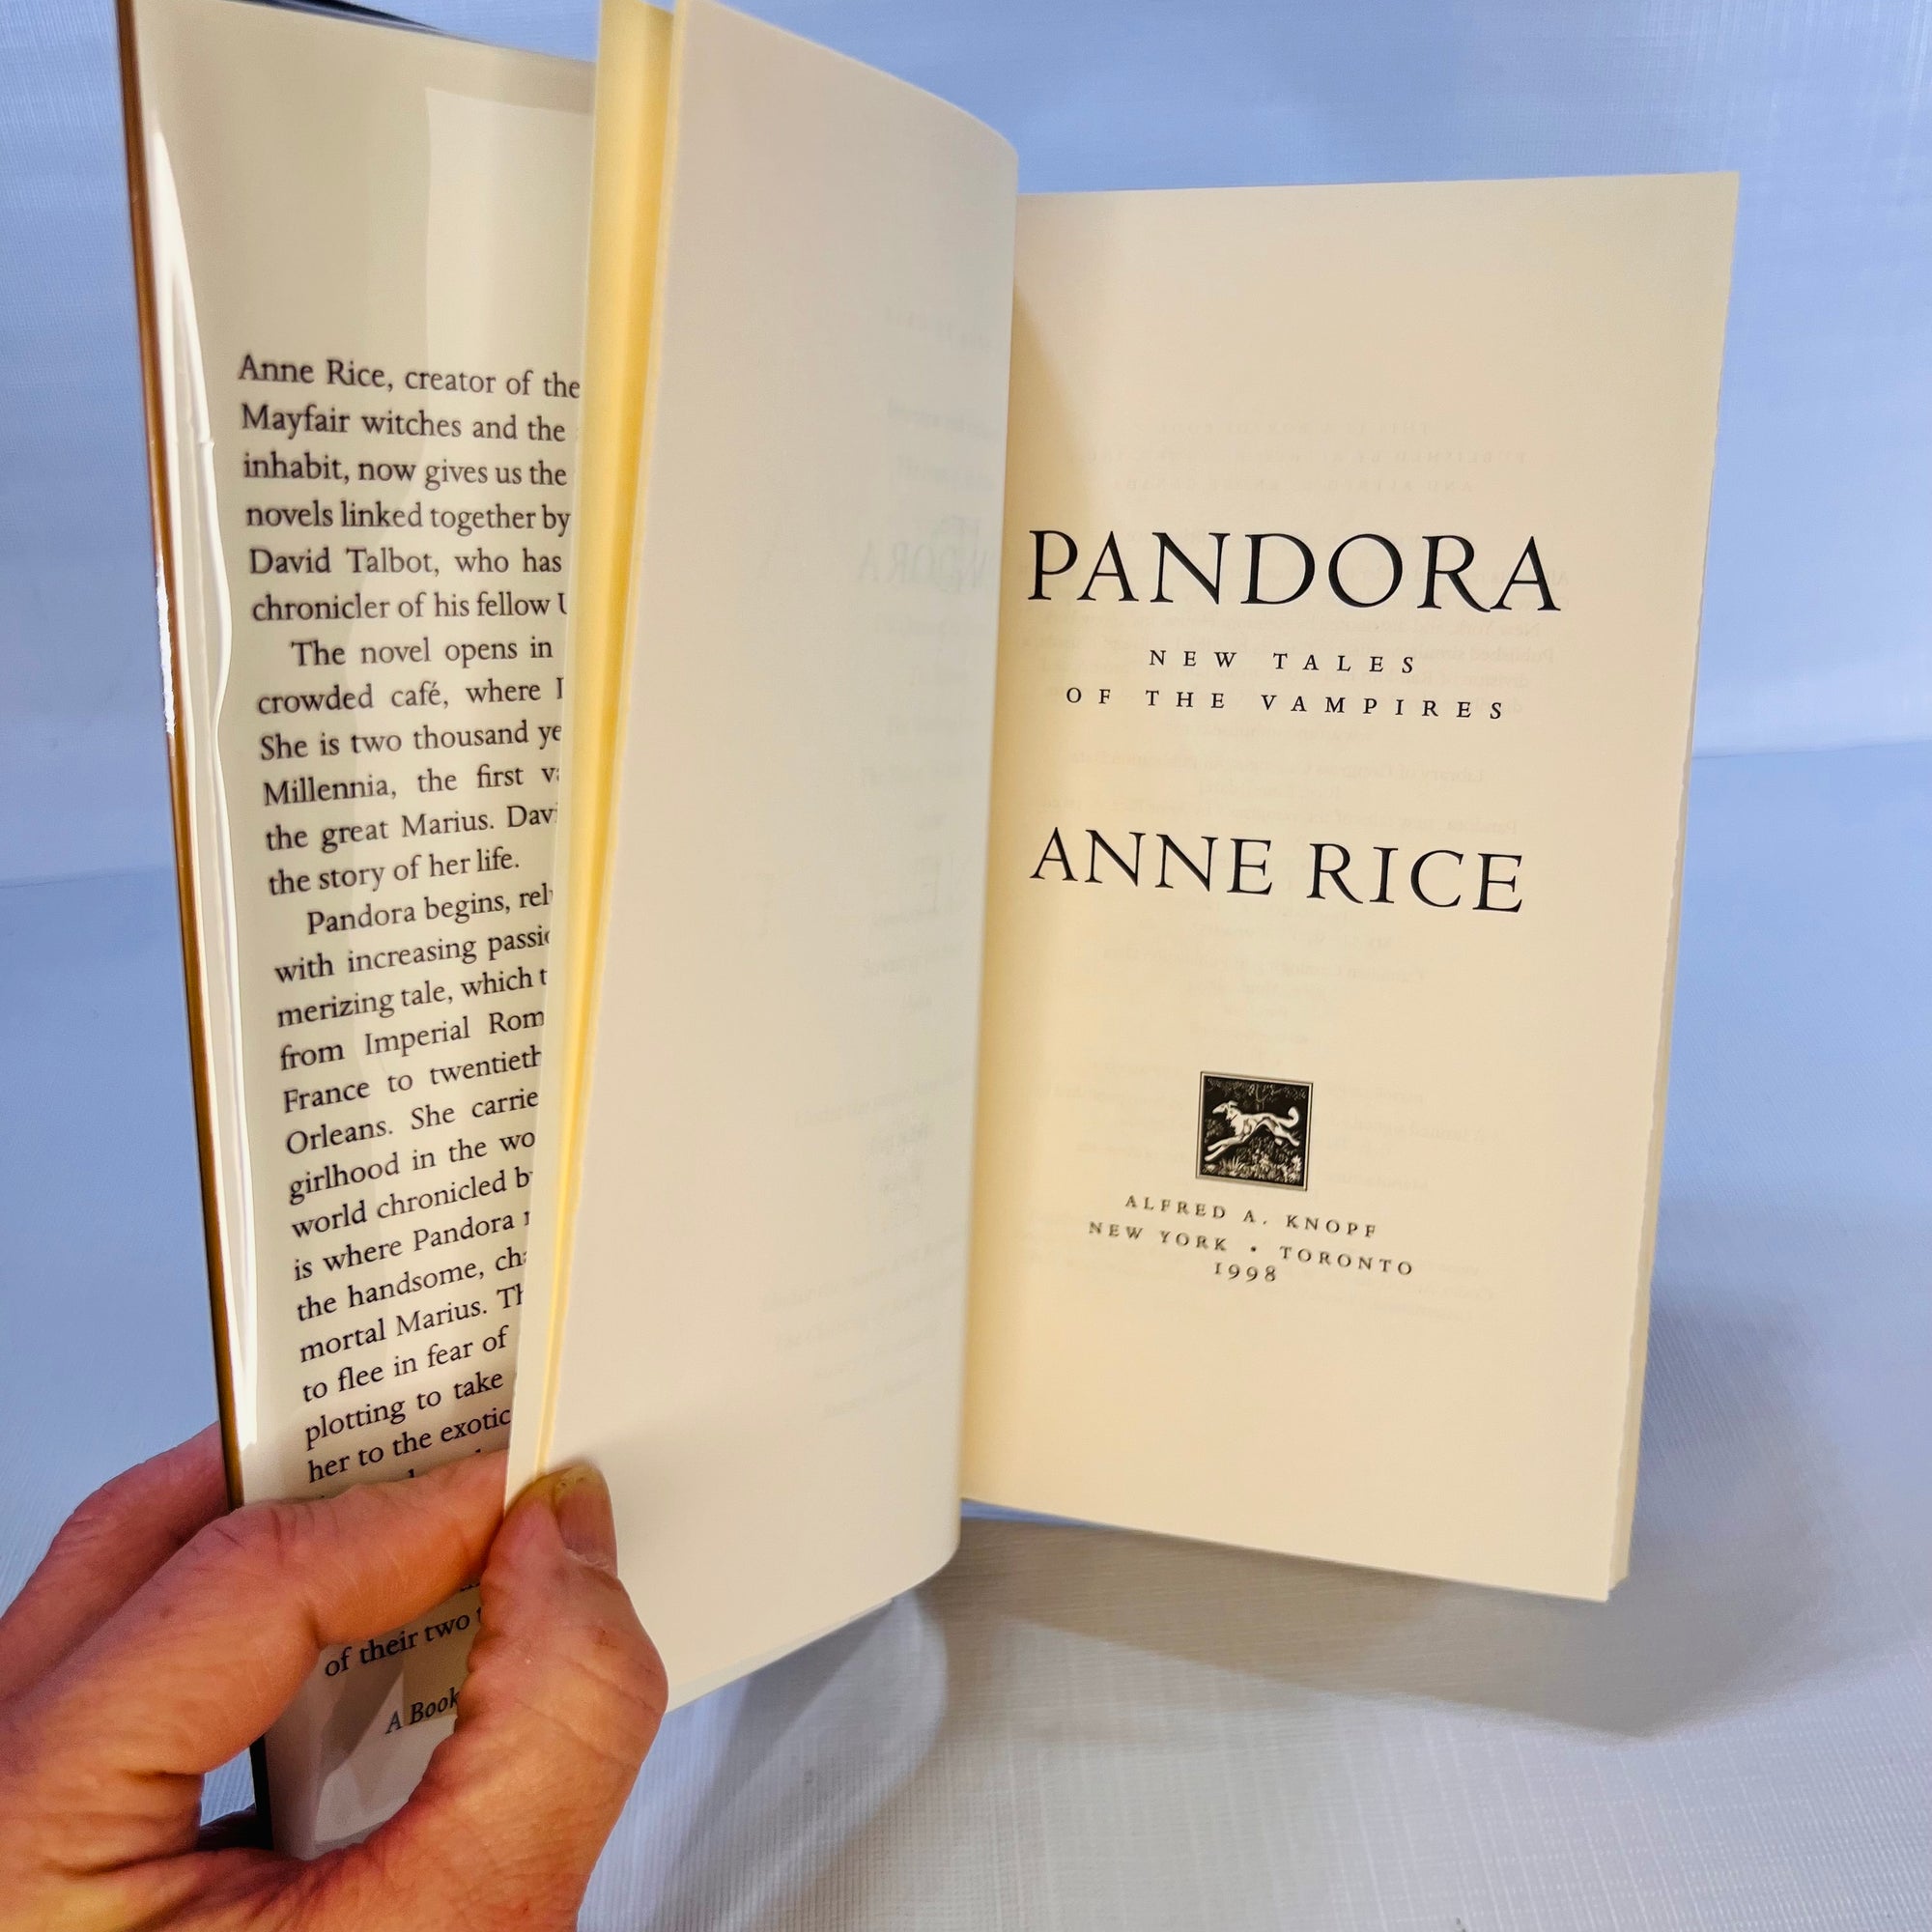 Pandora: New Tales of the Vampires by Anne Rice 1998 First Trade Edition Alfred A. Knopf